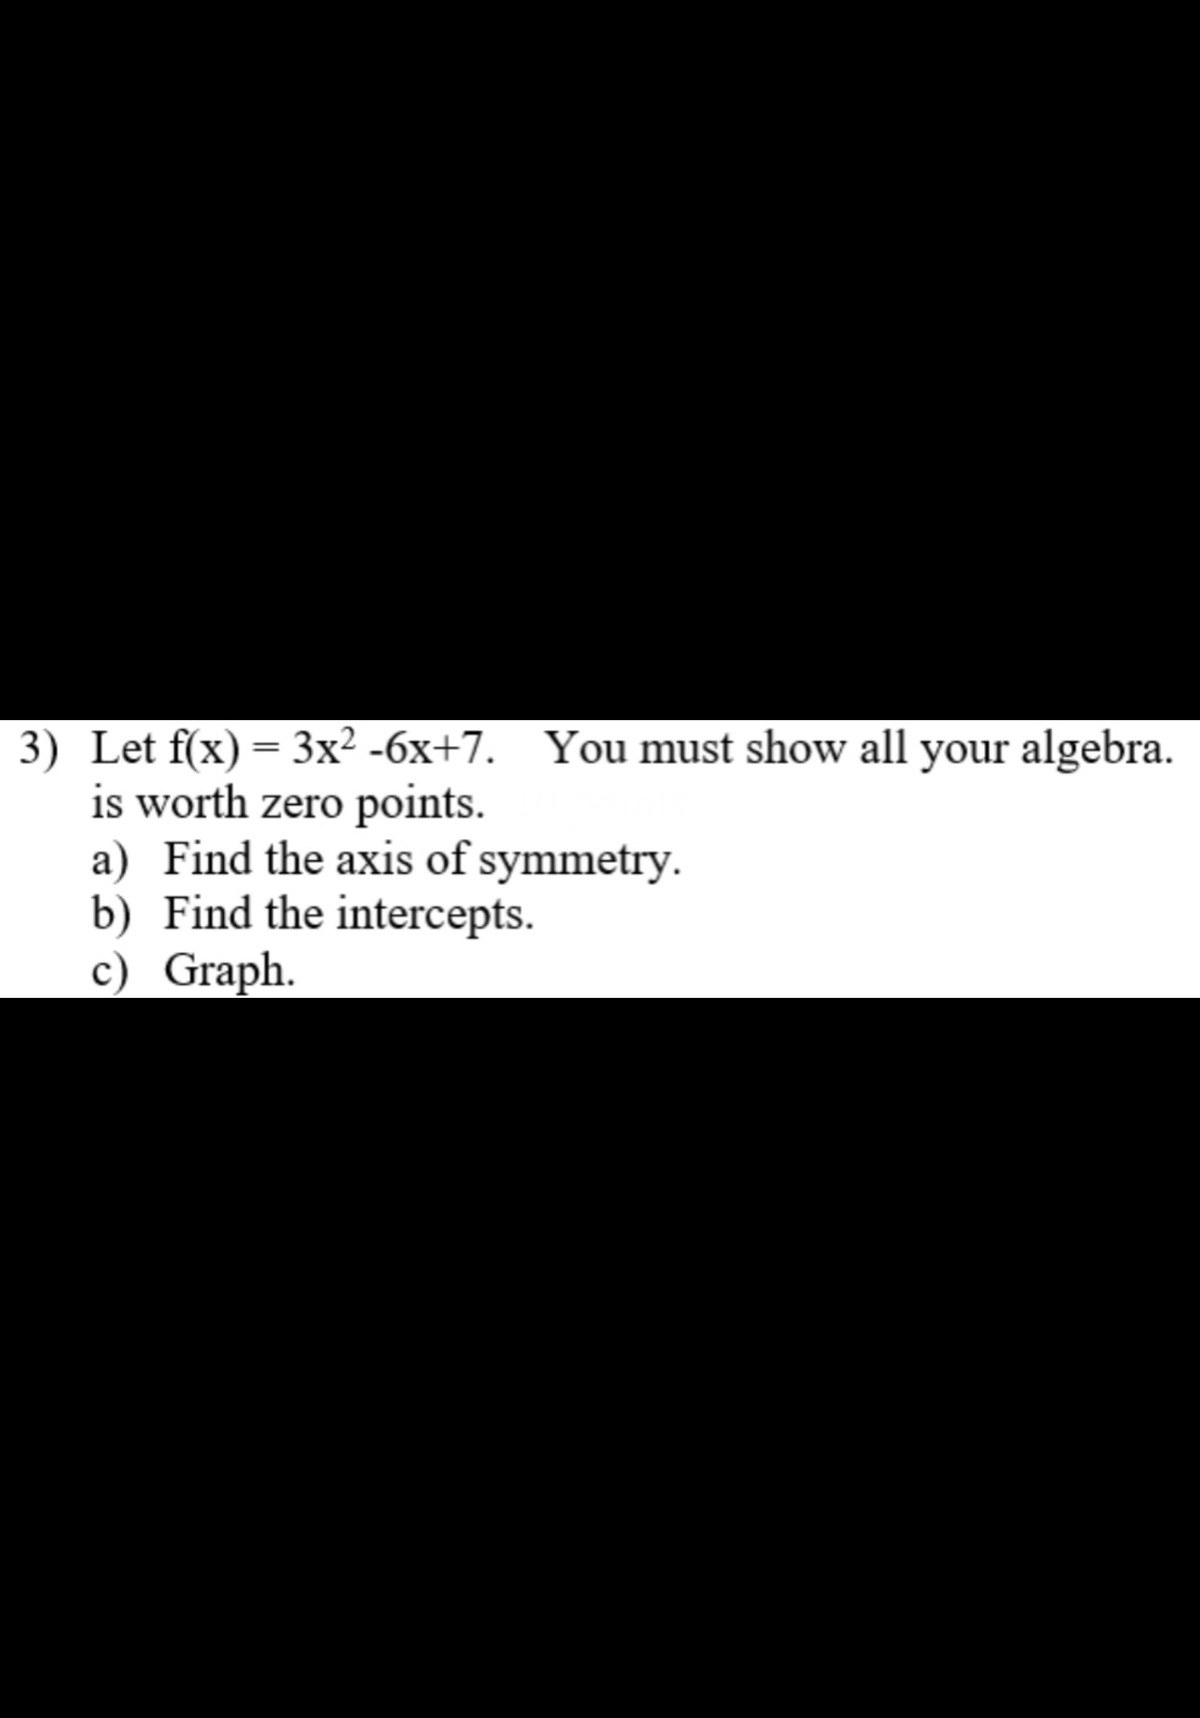 3) Let f(x) = 3x² -6x+7. You must show all your algebra.
is worth zero points.
a) Find the axis of symmetry.
b) Find the intercepts.
c) Graph.